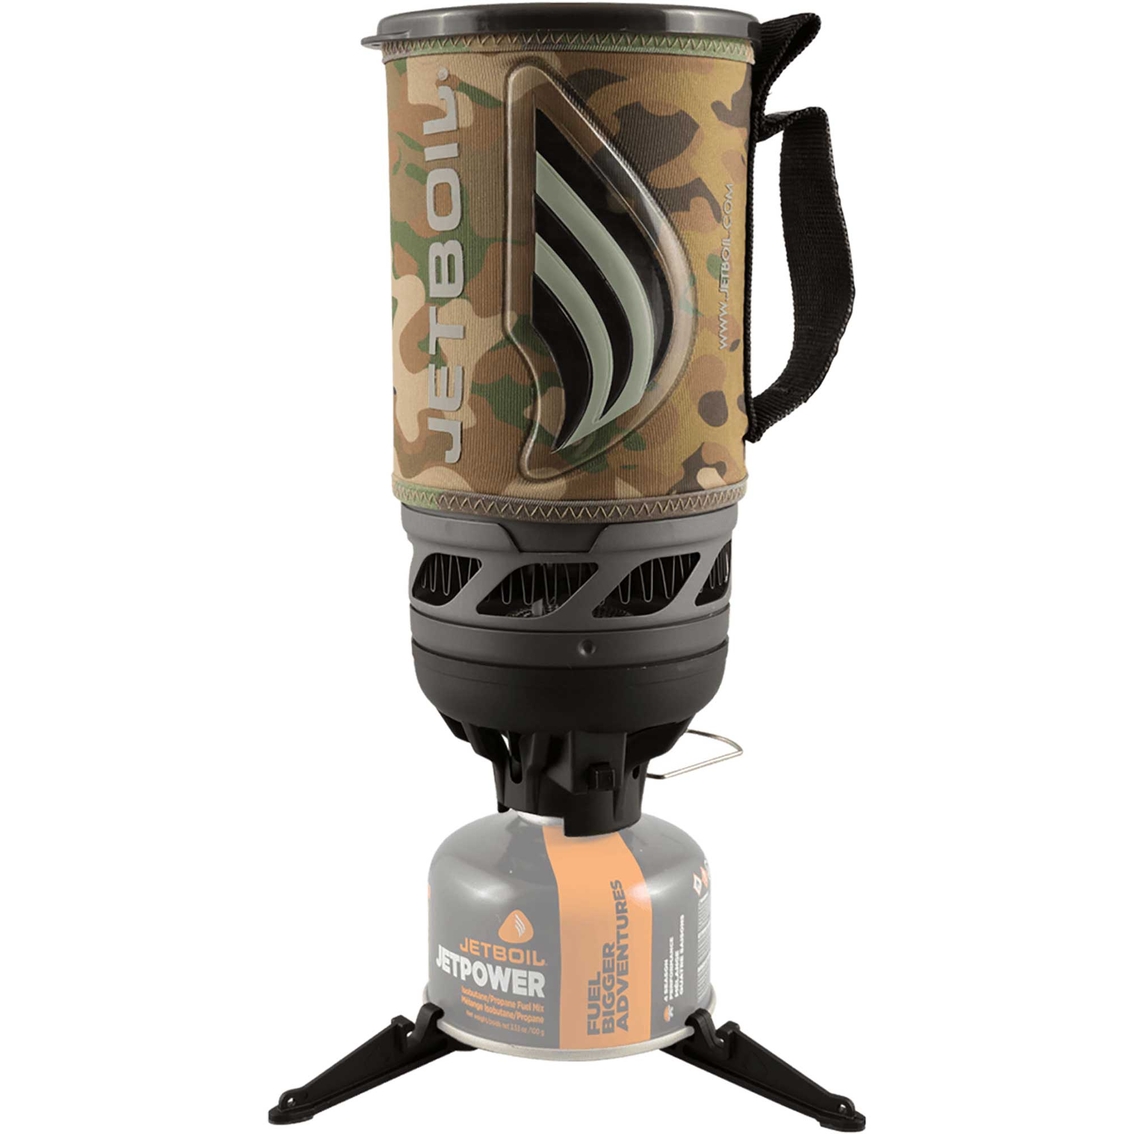 Brigade QM Jetboil Flash Cooking System - Image 1 of 4